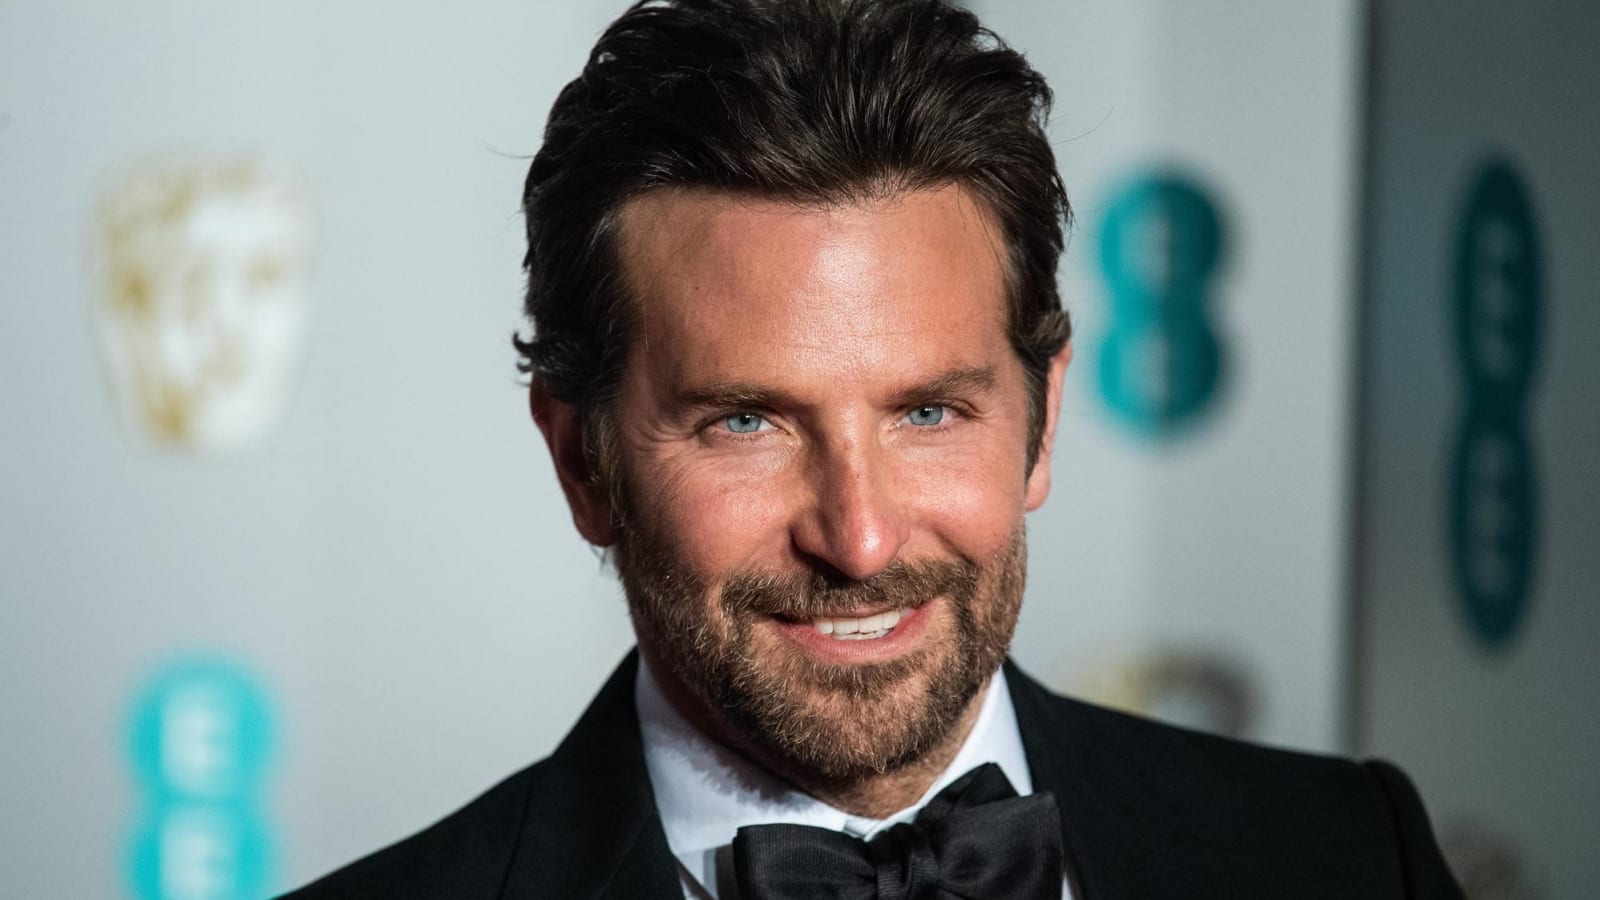 Bradley Cooper describes being held at knifepoint in New York City